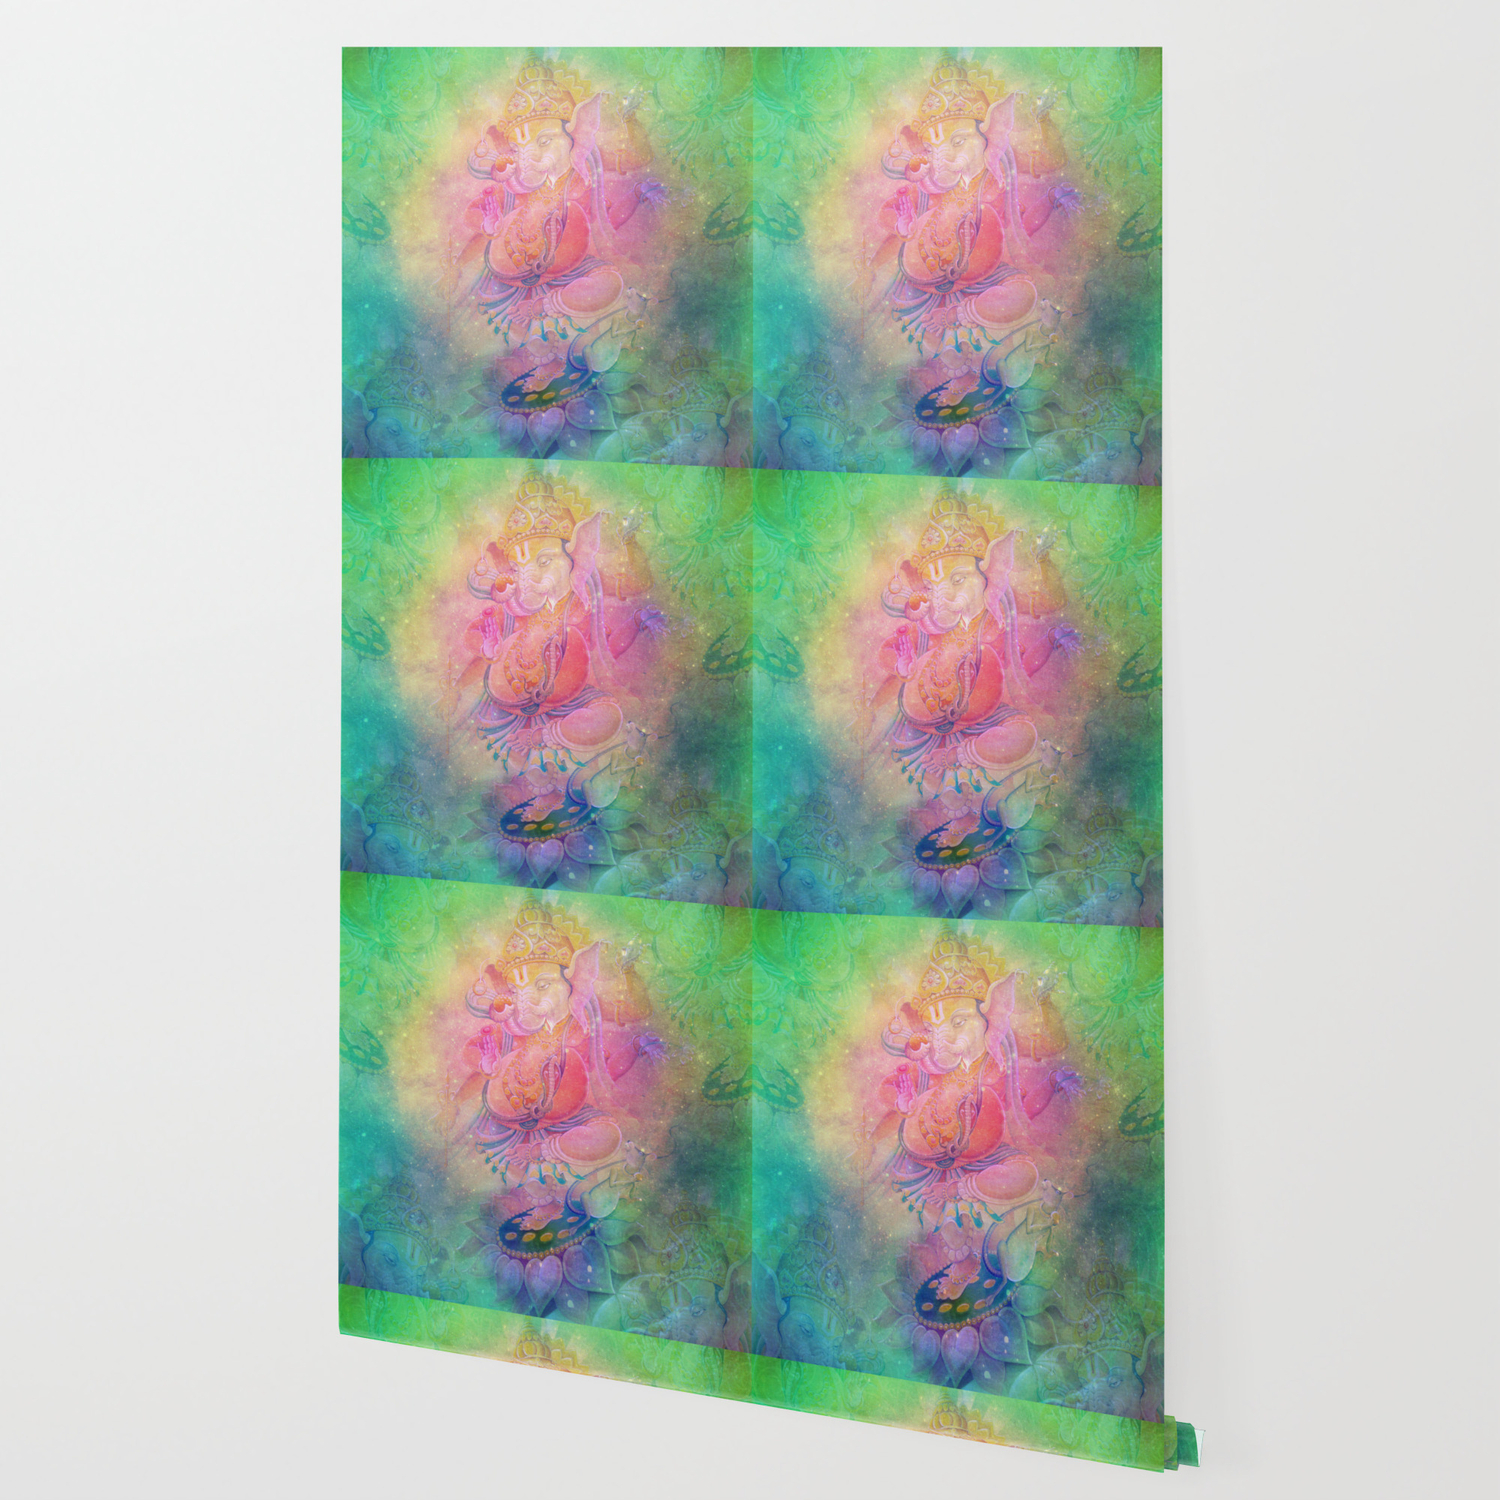 Psychedelic Trippy Ganesh Wallpaper by Psychedelic Astronaut | Society6